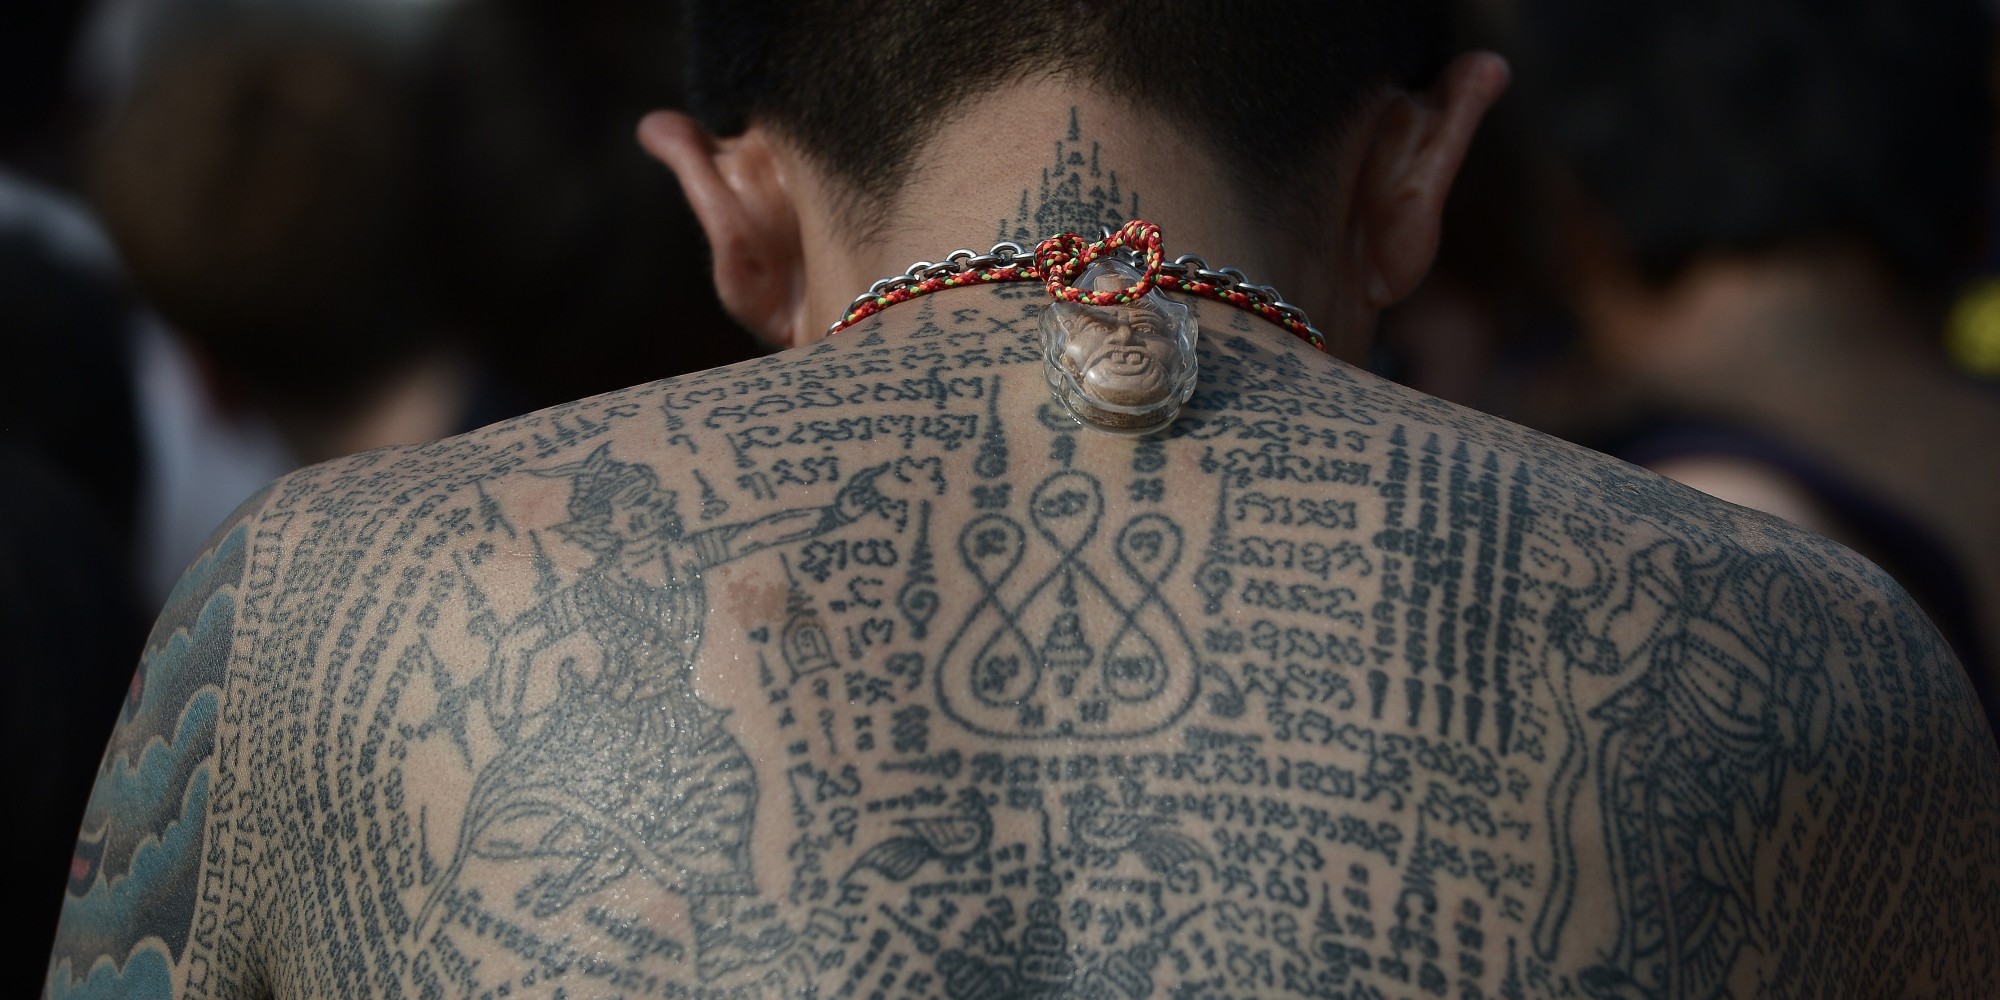 Thousands Gather In Thailand To Receive Magical Tattoos From Buddhist